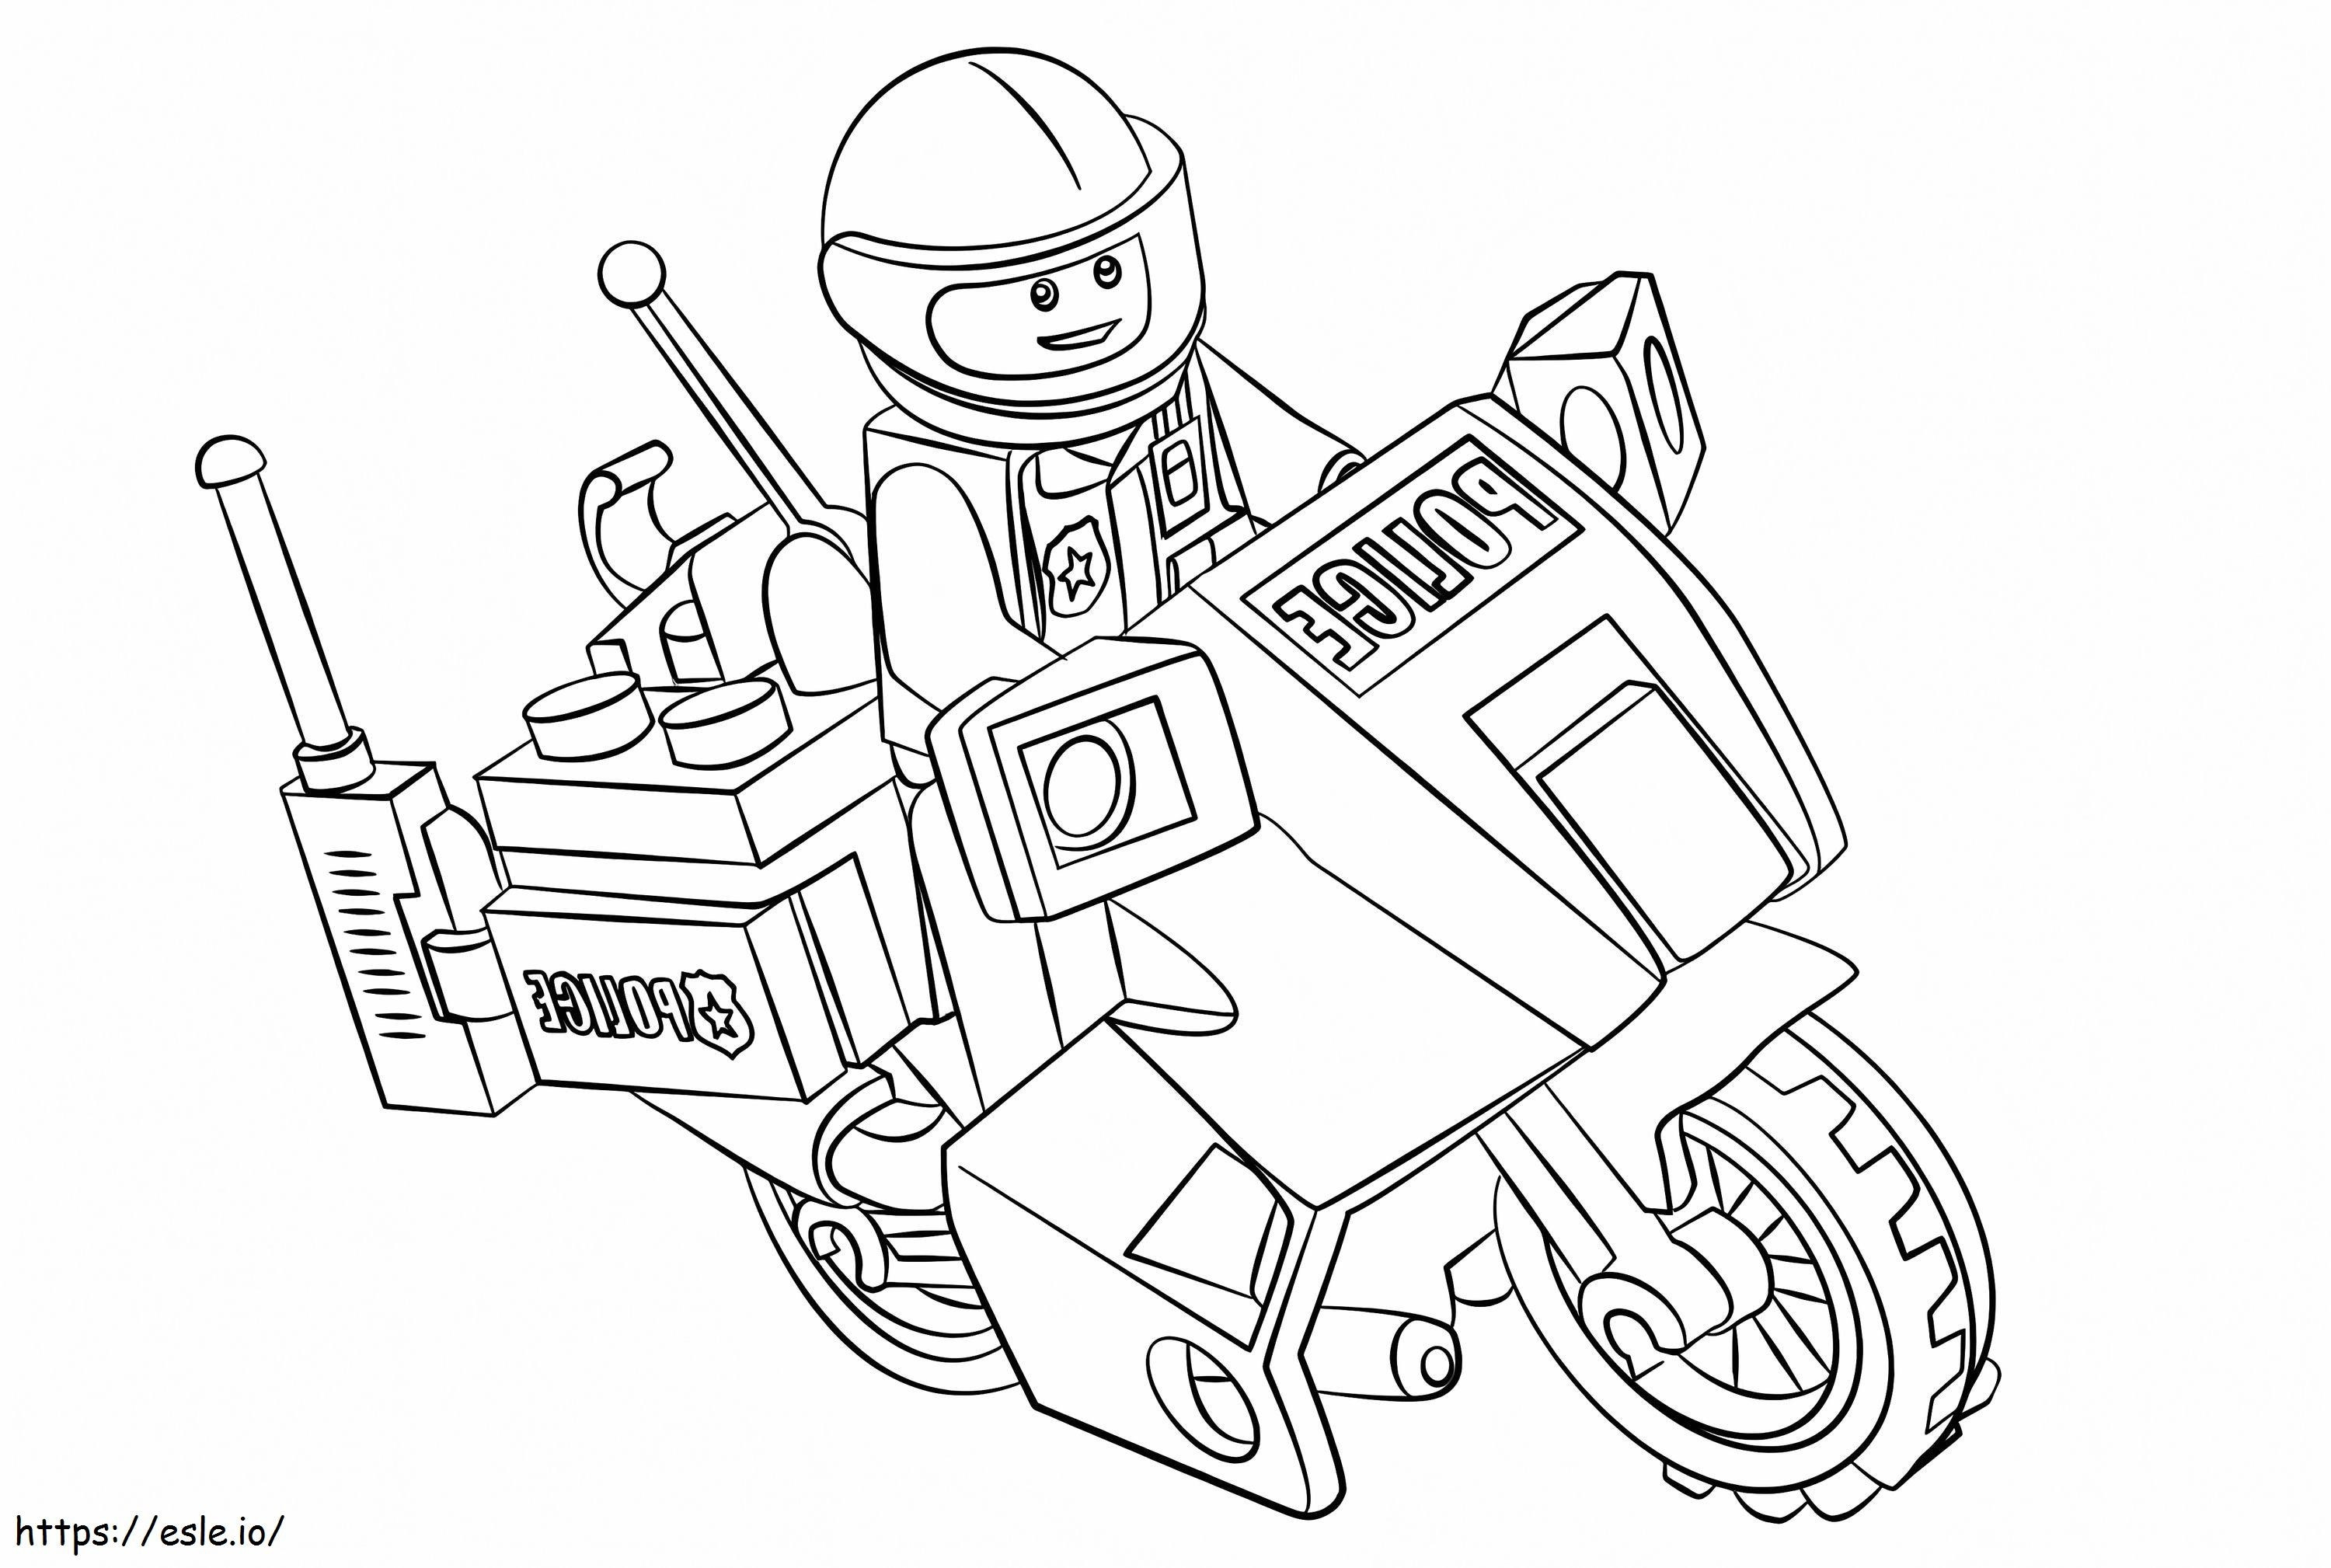 Police Lego City coloring page